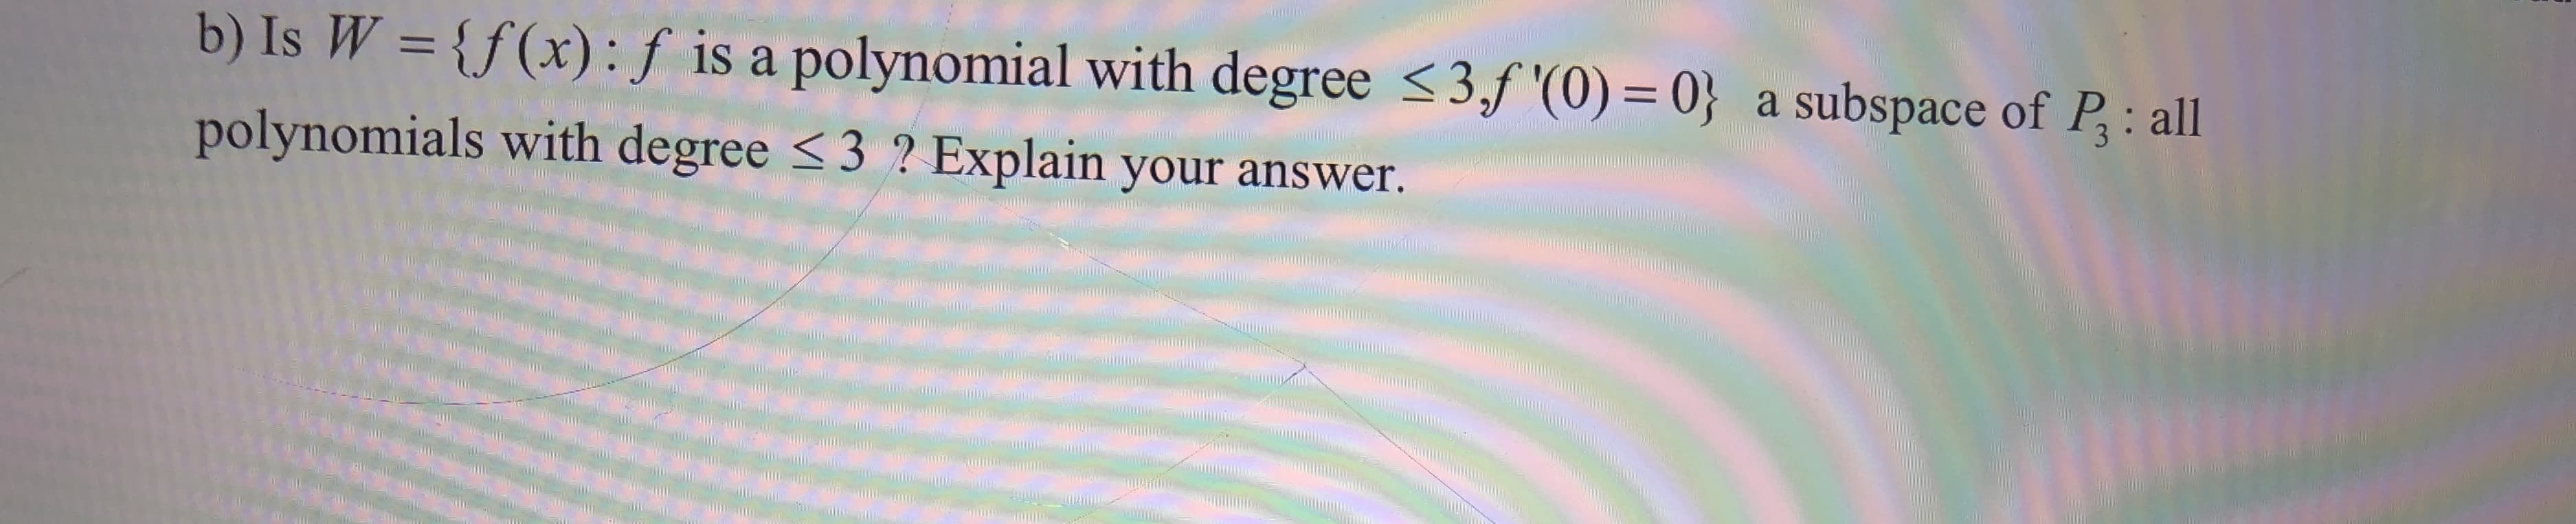 b) Is W = {f(x):f is a polynomial with degree <3,f (0) 0} a subspace of P: all
3 ? Explain your answer.
polynomials with degree
